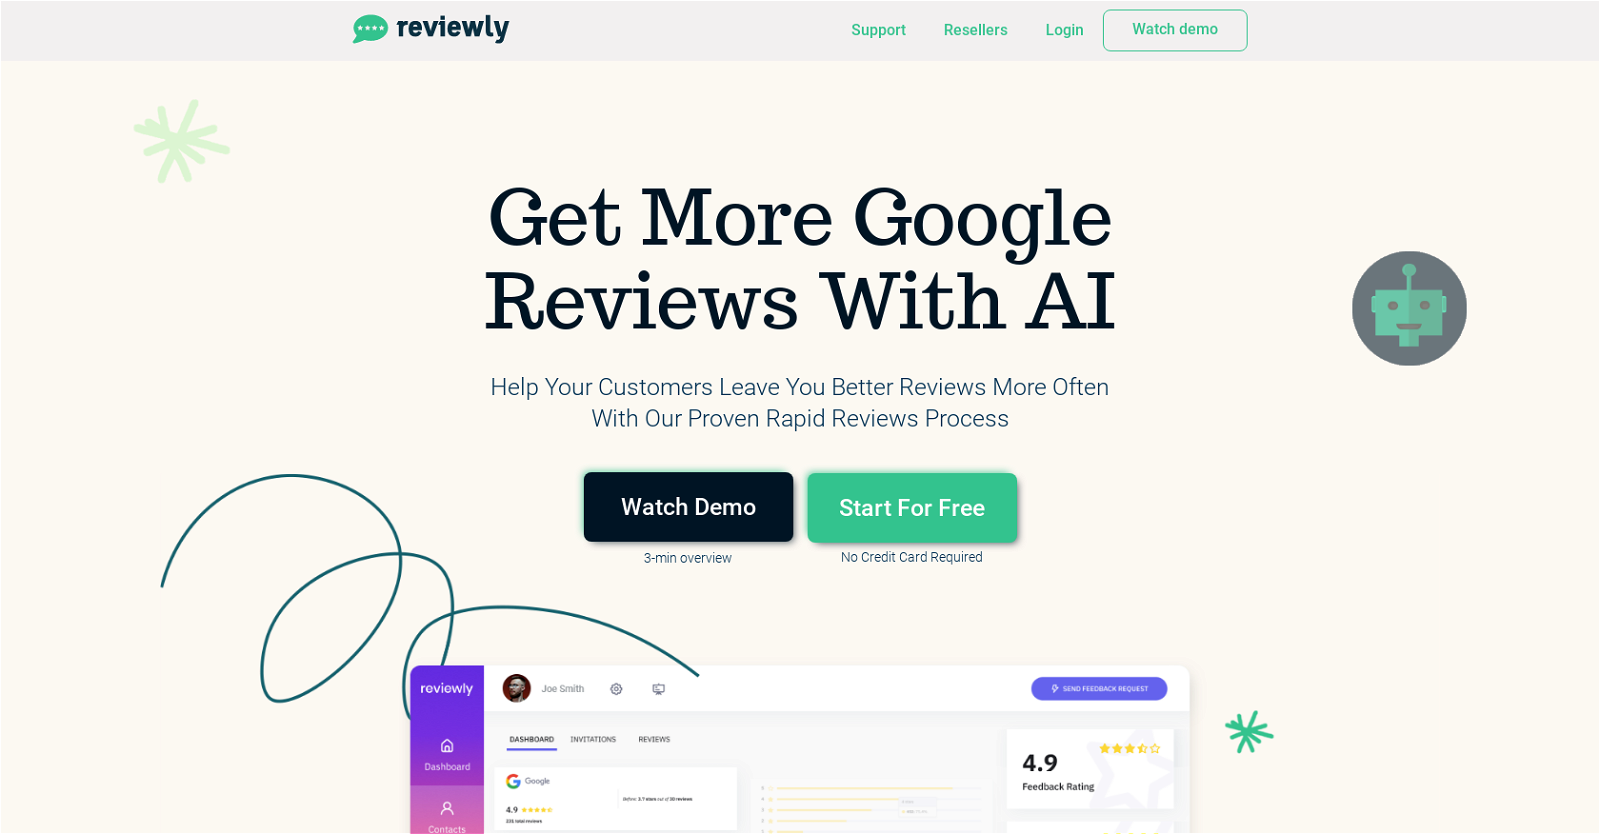 Reviewly website